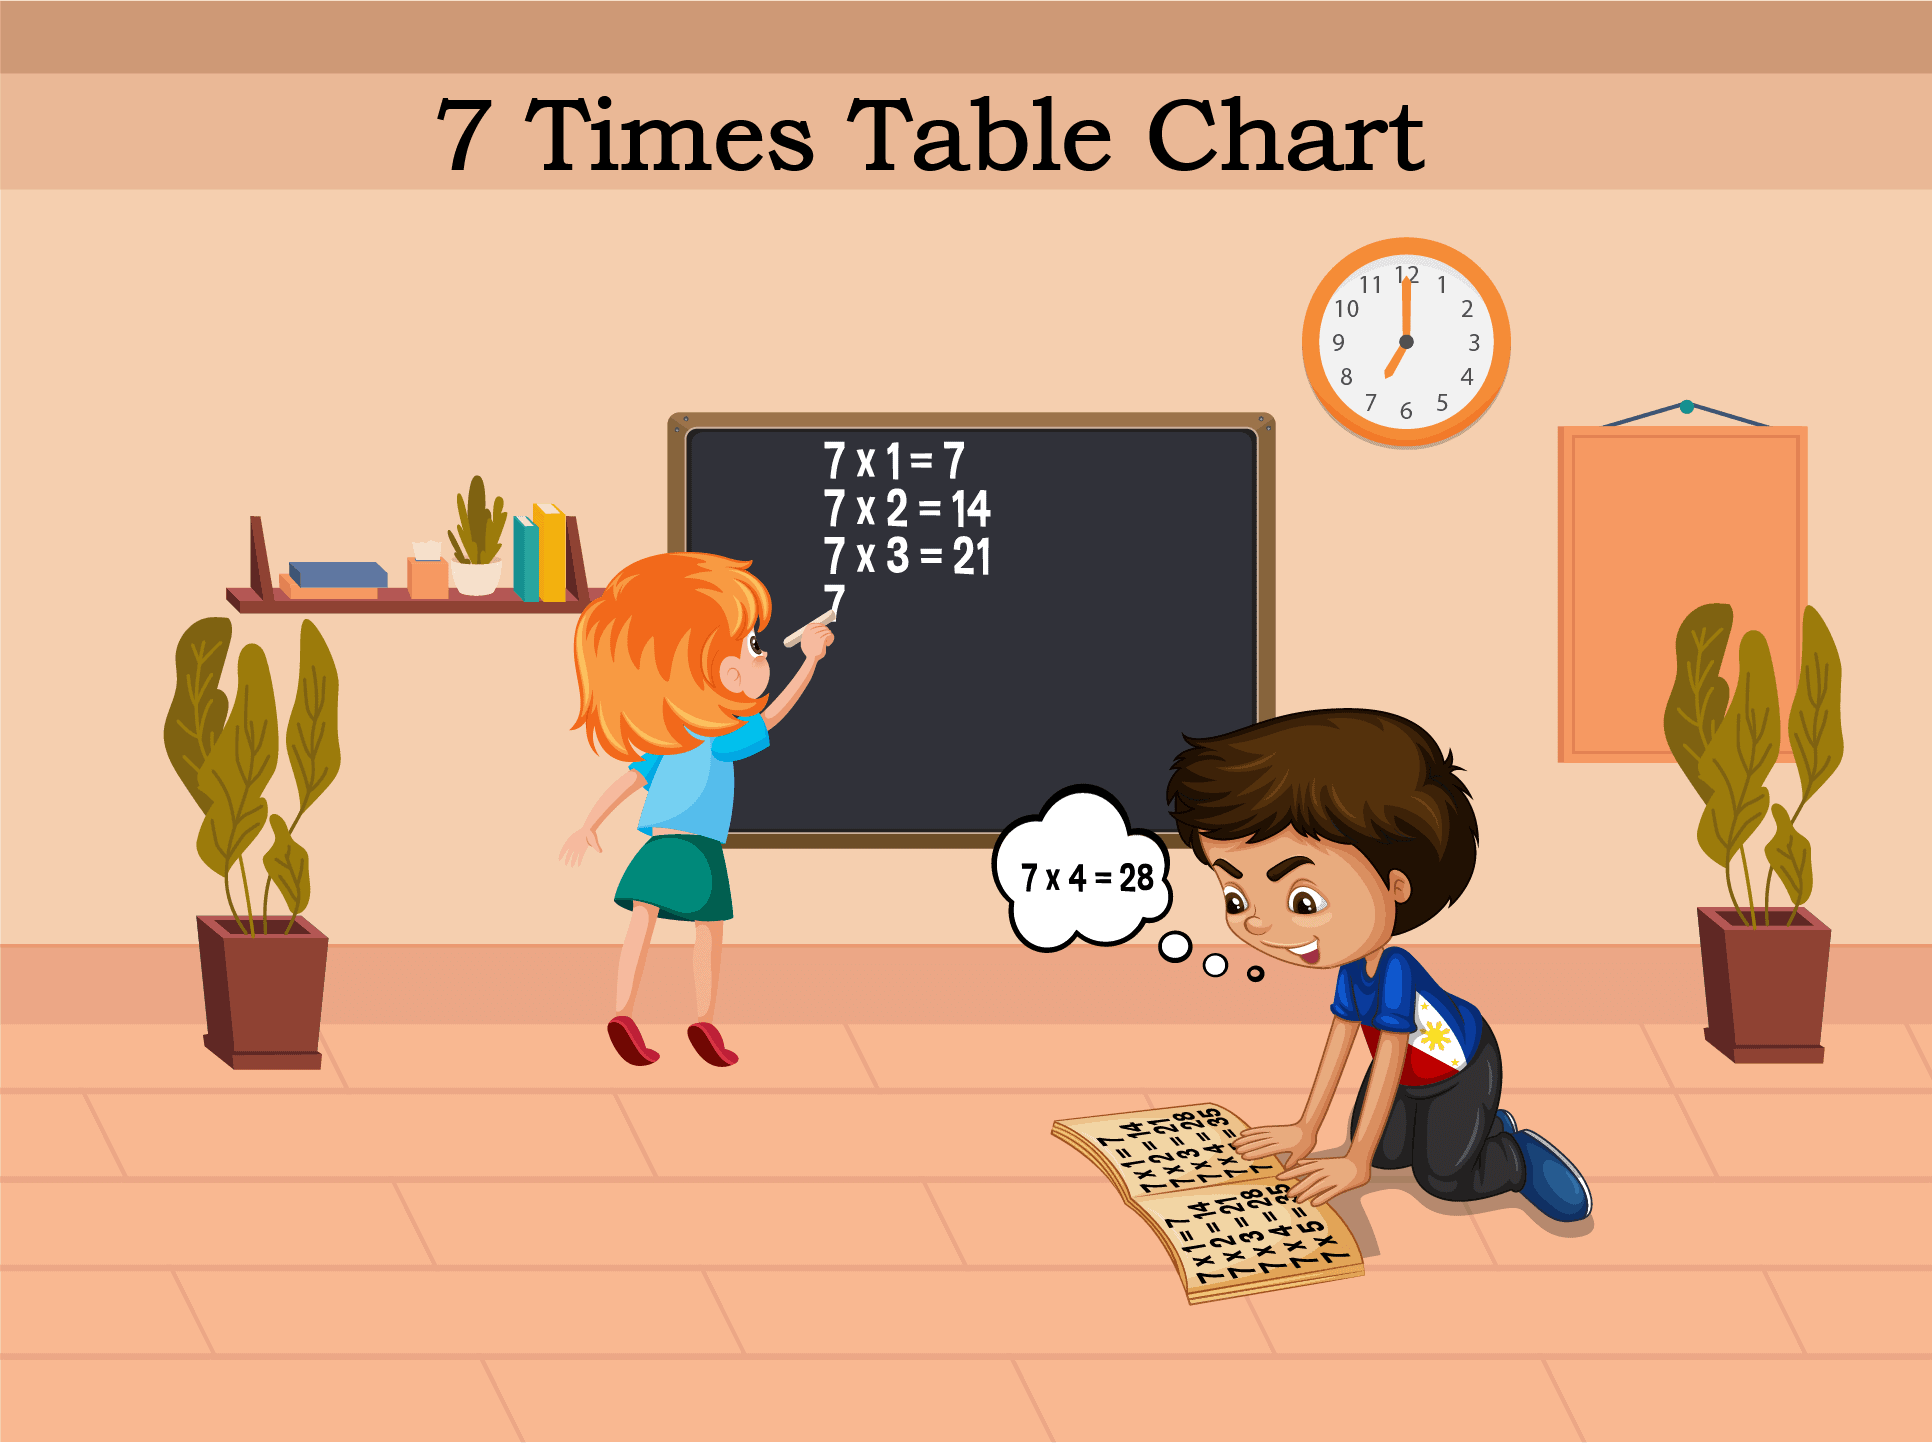 7 times table Chart overview